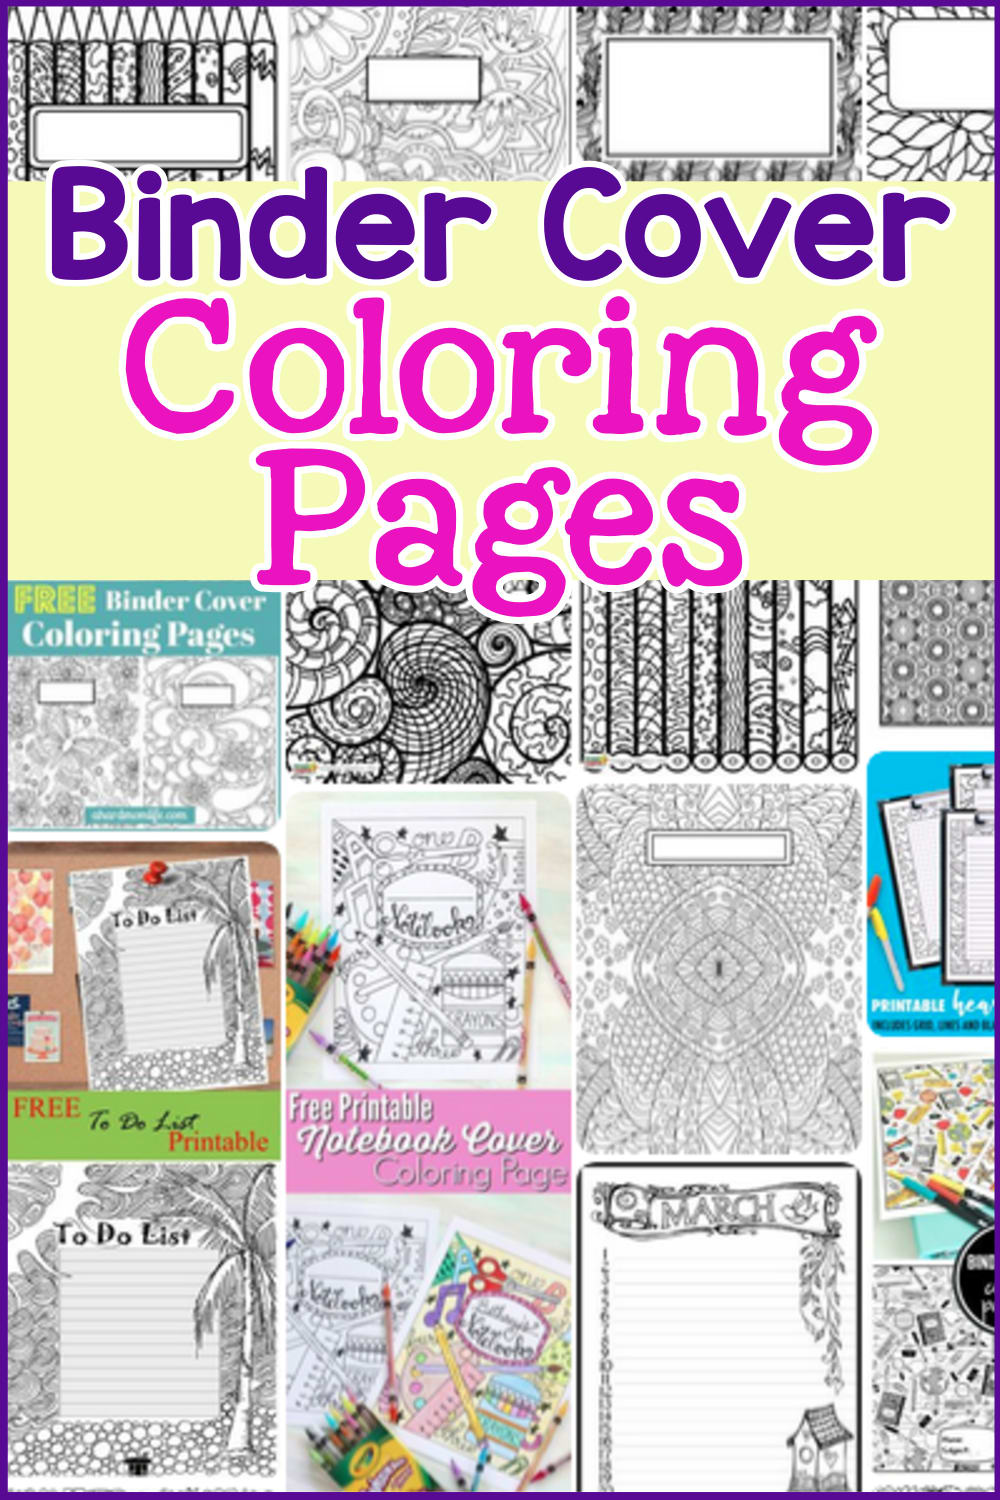 Binder Cover Coloring Pages - From: Binder Covers-Best FREE Templates, Printables & Ideas 